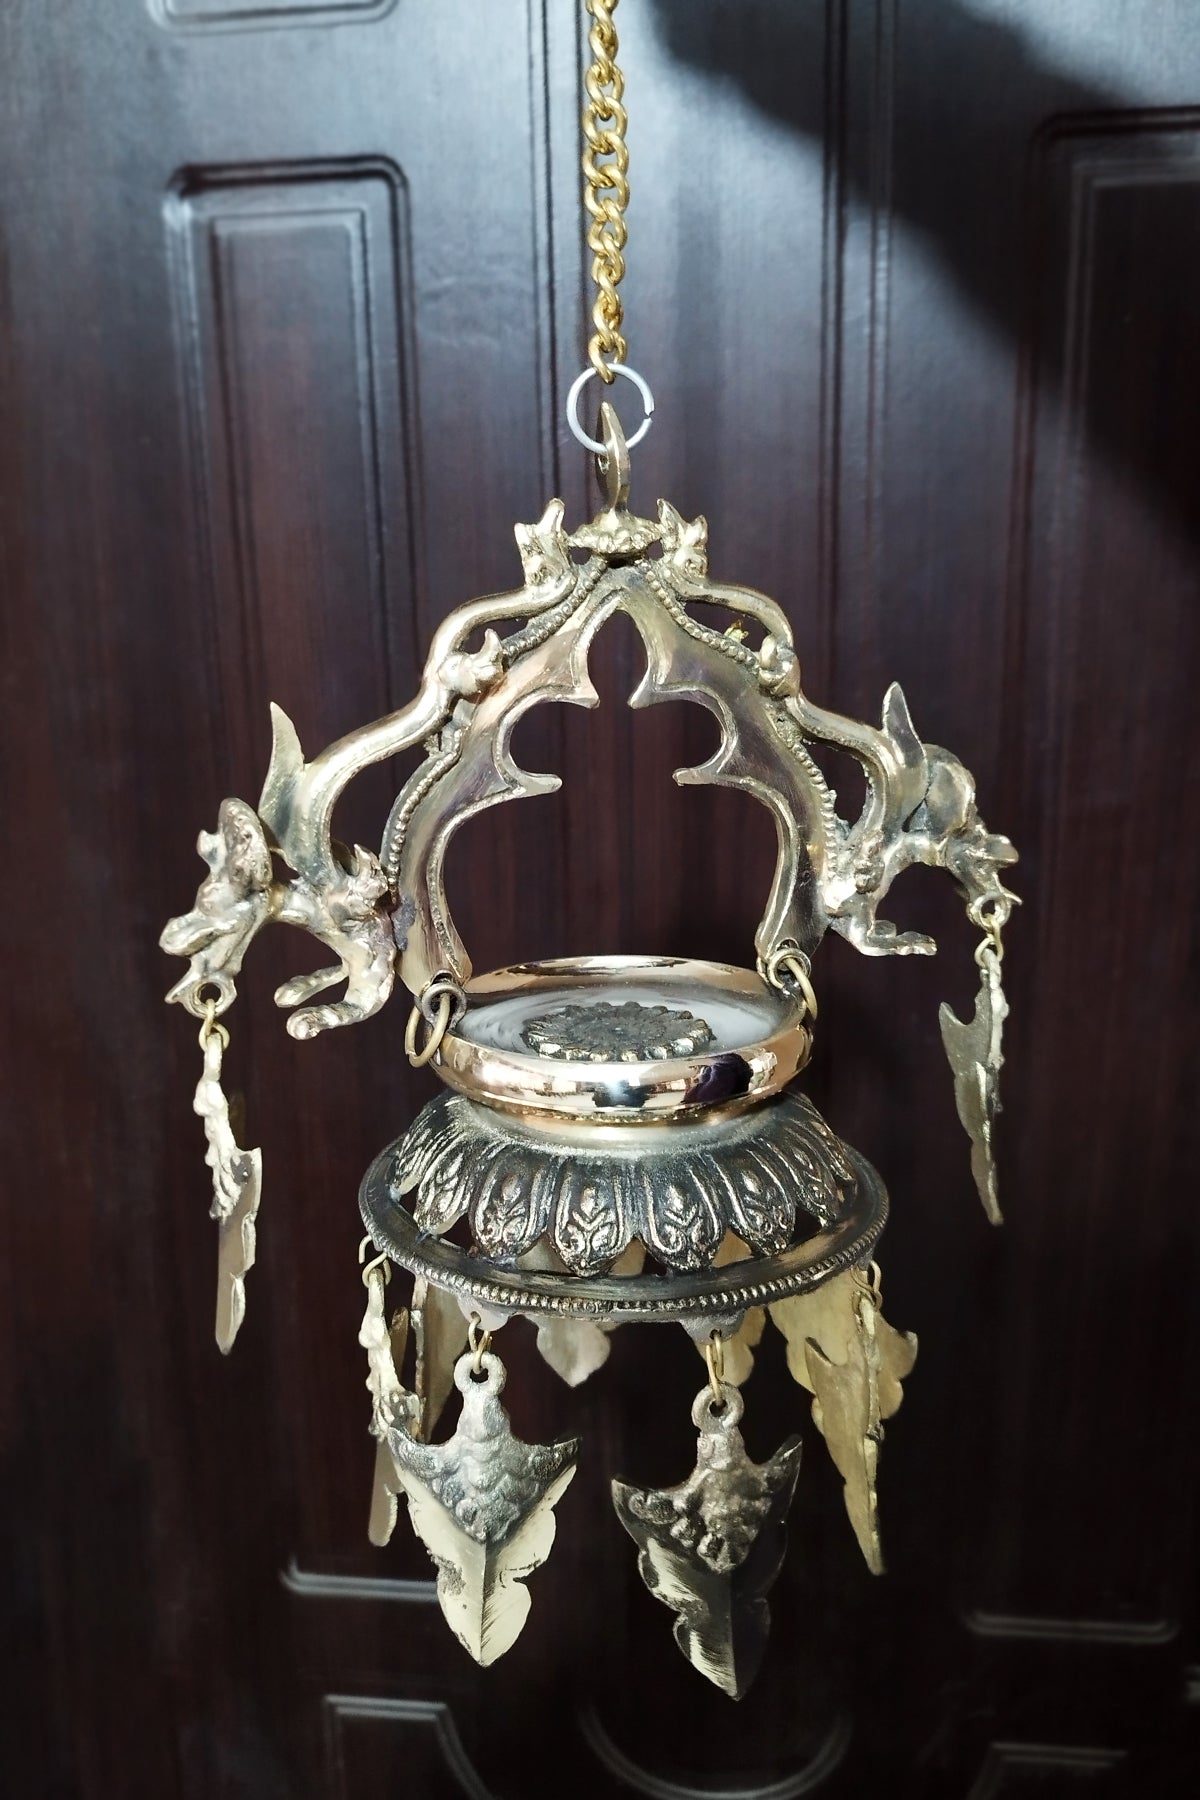 Hanging Oil Lamp From Nepal, Dalucha